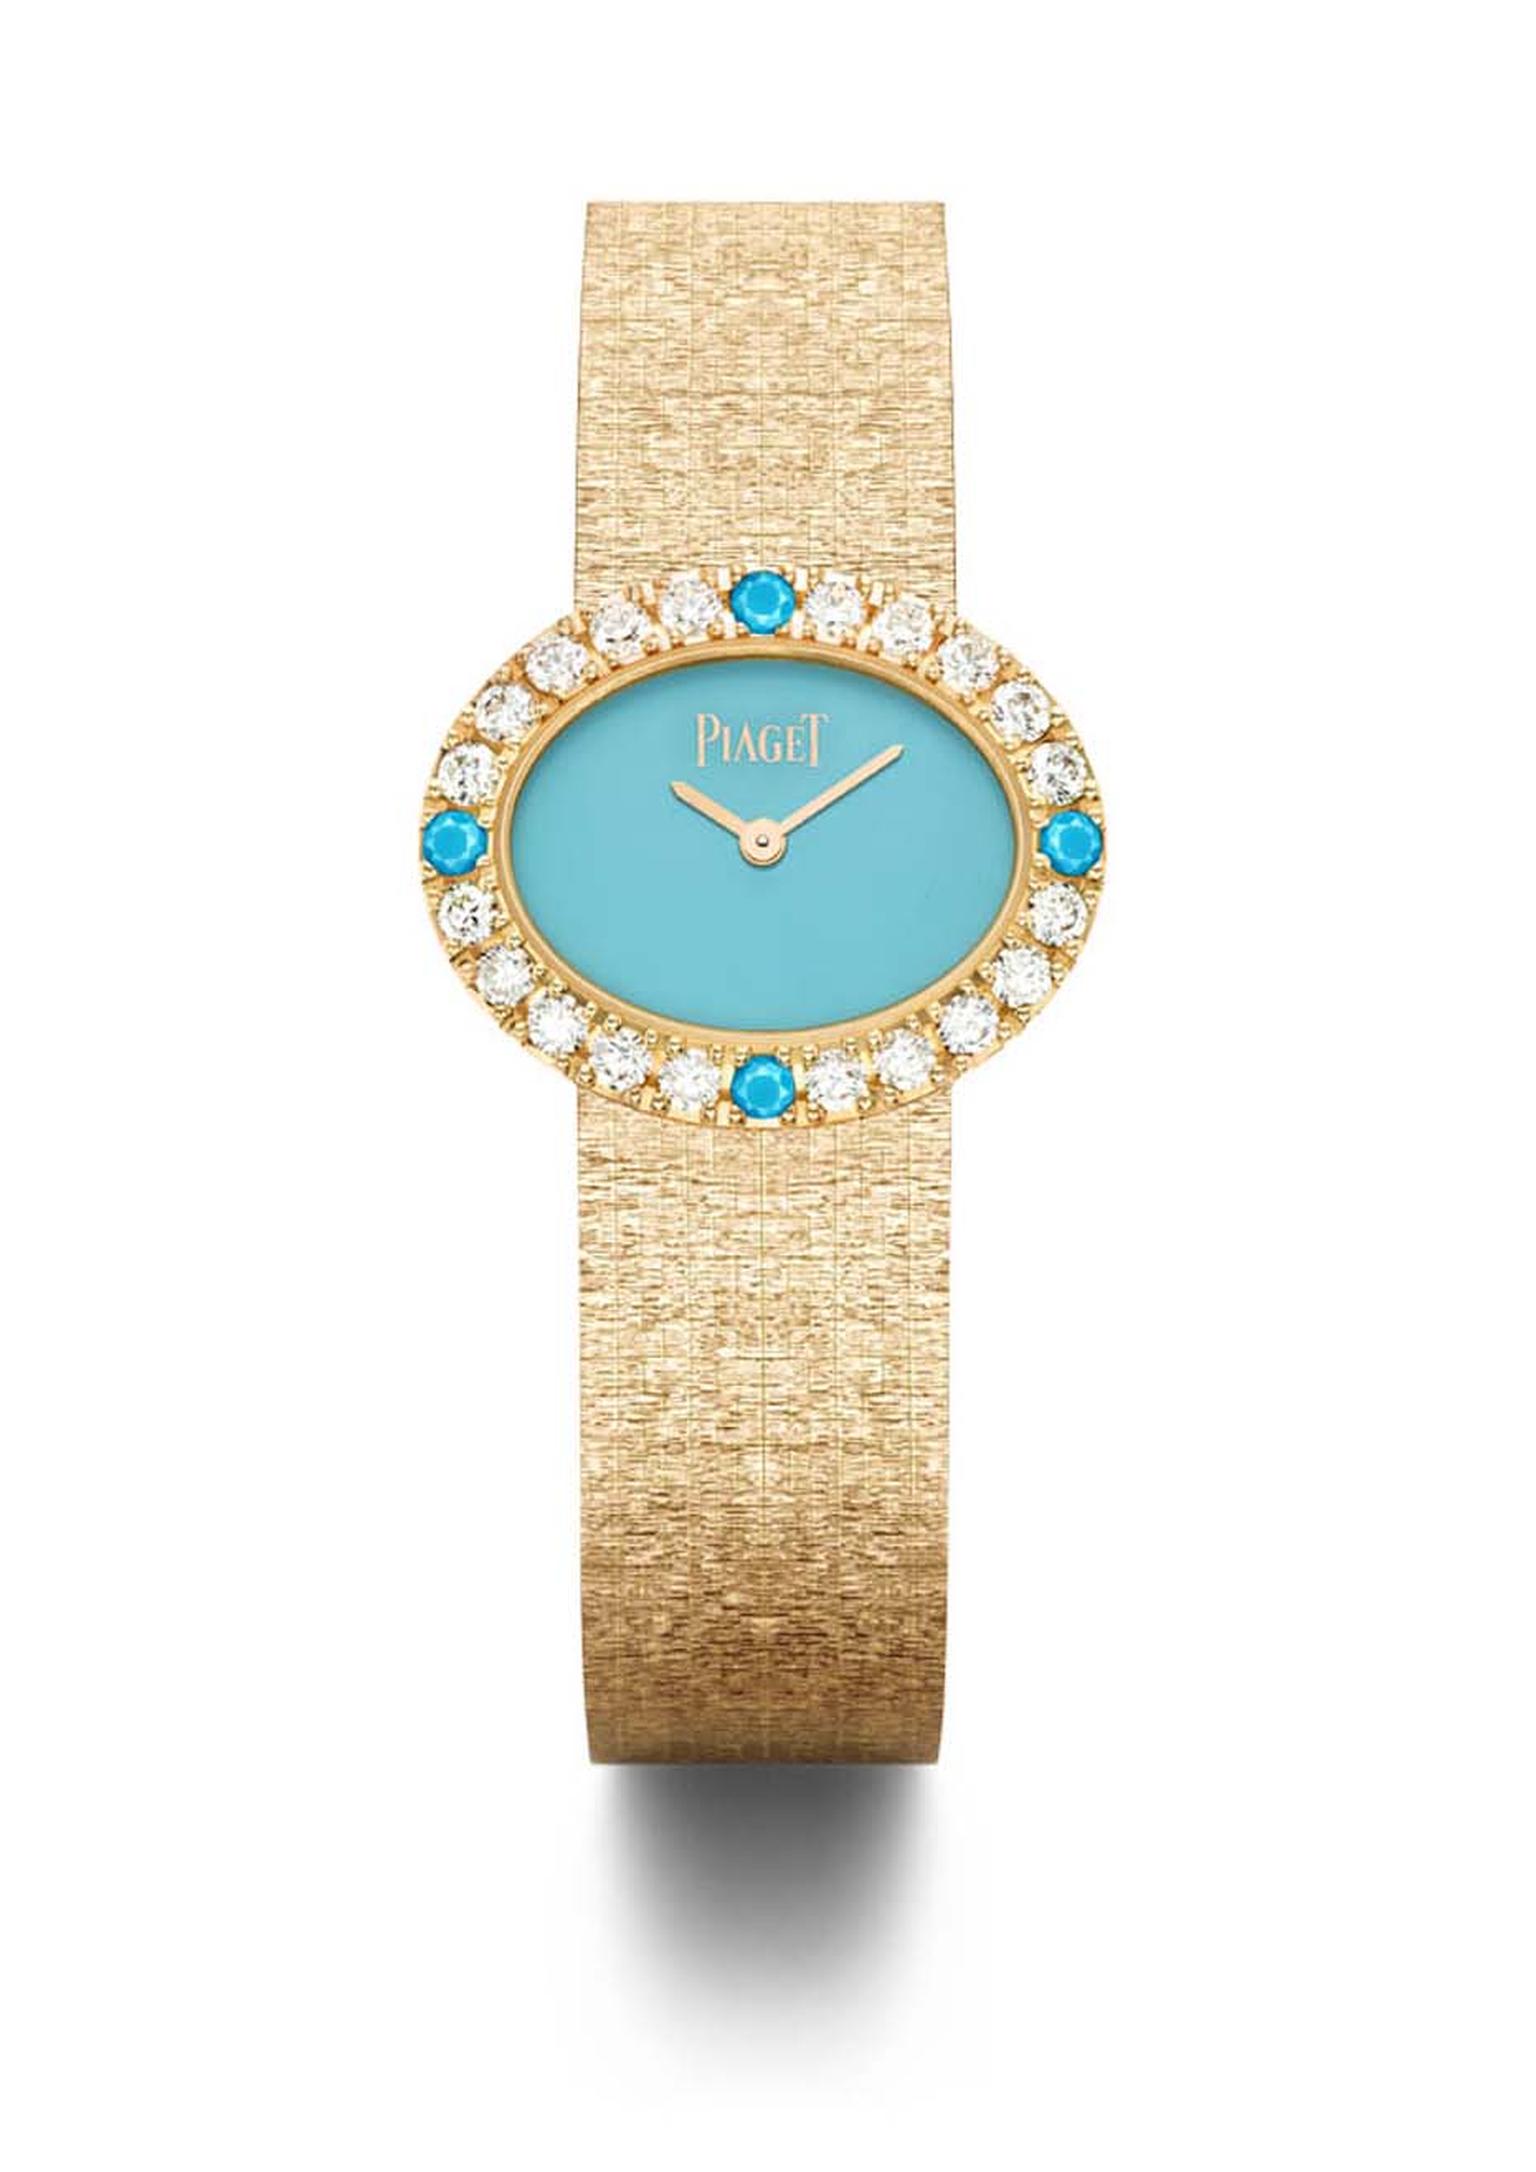 Piaget traditional 18ct pink gold oval watch, featuring a turquoise dial, set with 20 brilliant-cut diamonds and 4 turquoise cabochons.